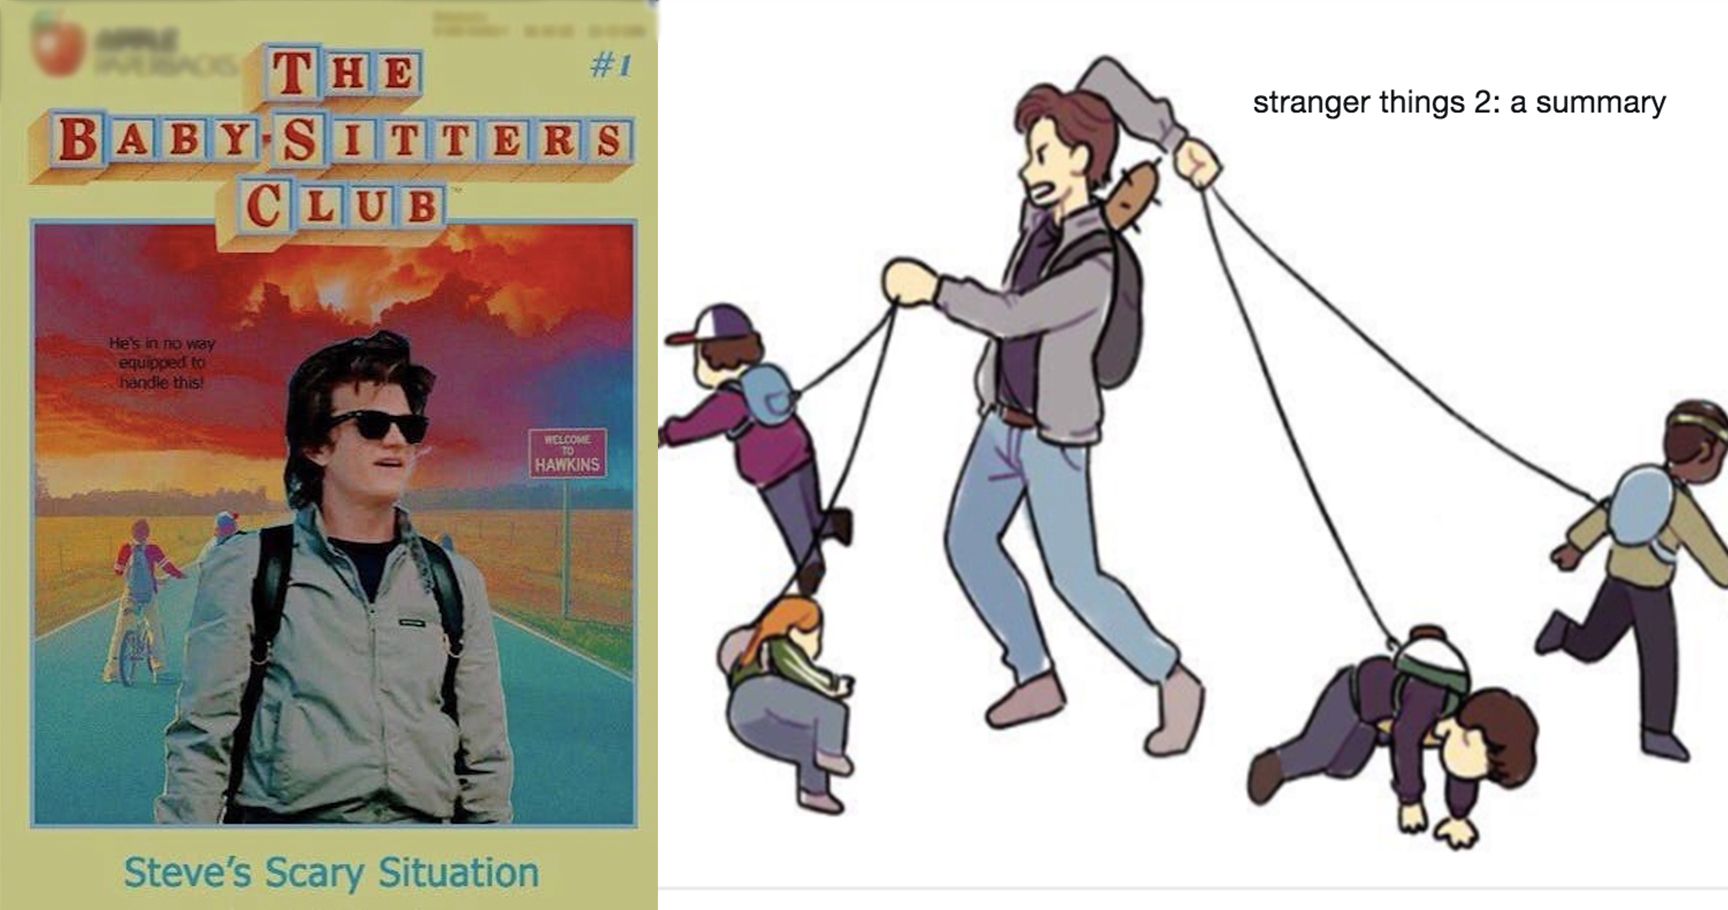 Hilarious Stranger Things 2 Memes You Havent Seen Yet